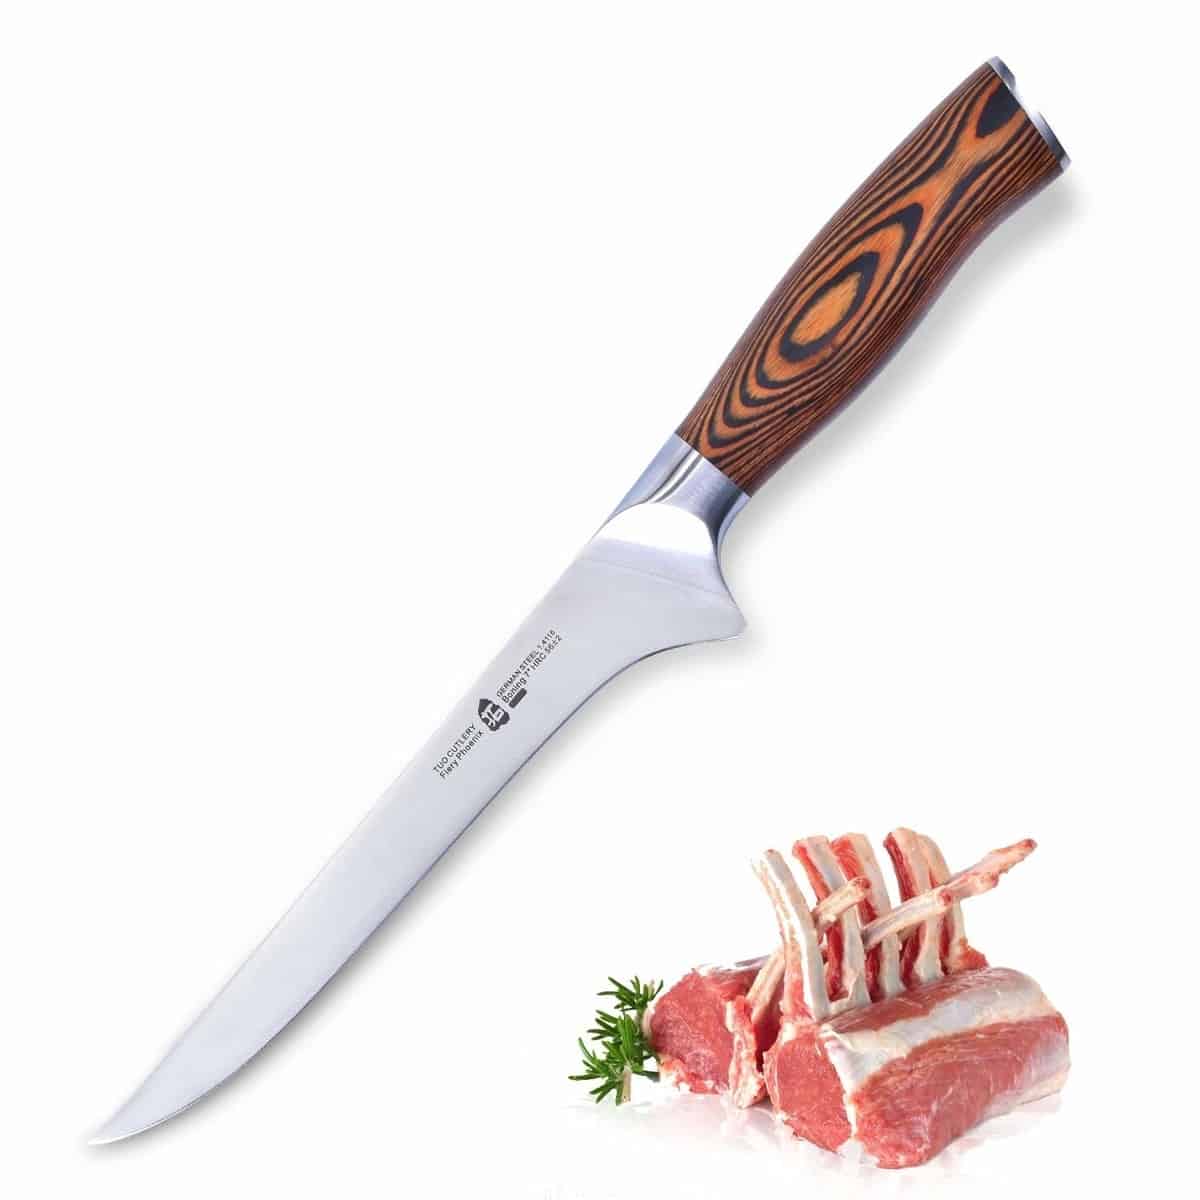 TUO Cutlery 7 inch Boning Knife - HC German Stainless steel - Narrow Fillet Knife with Ergonomic Pakkawood Handle - Fiery Series